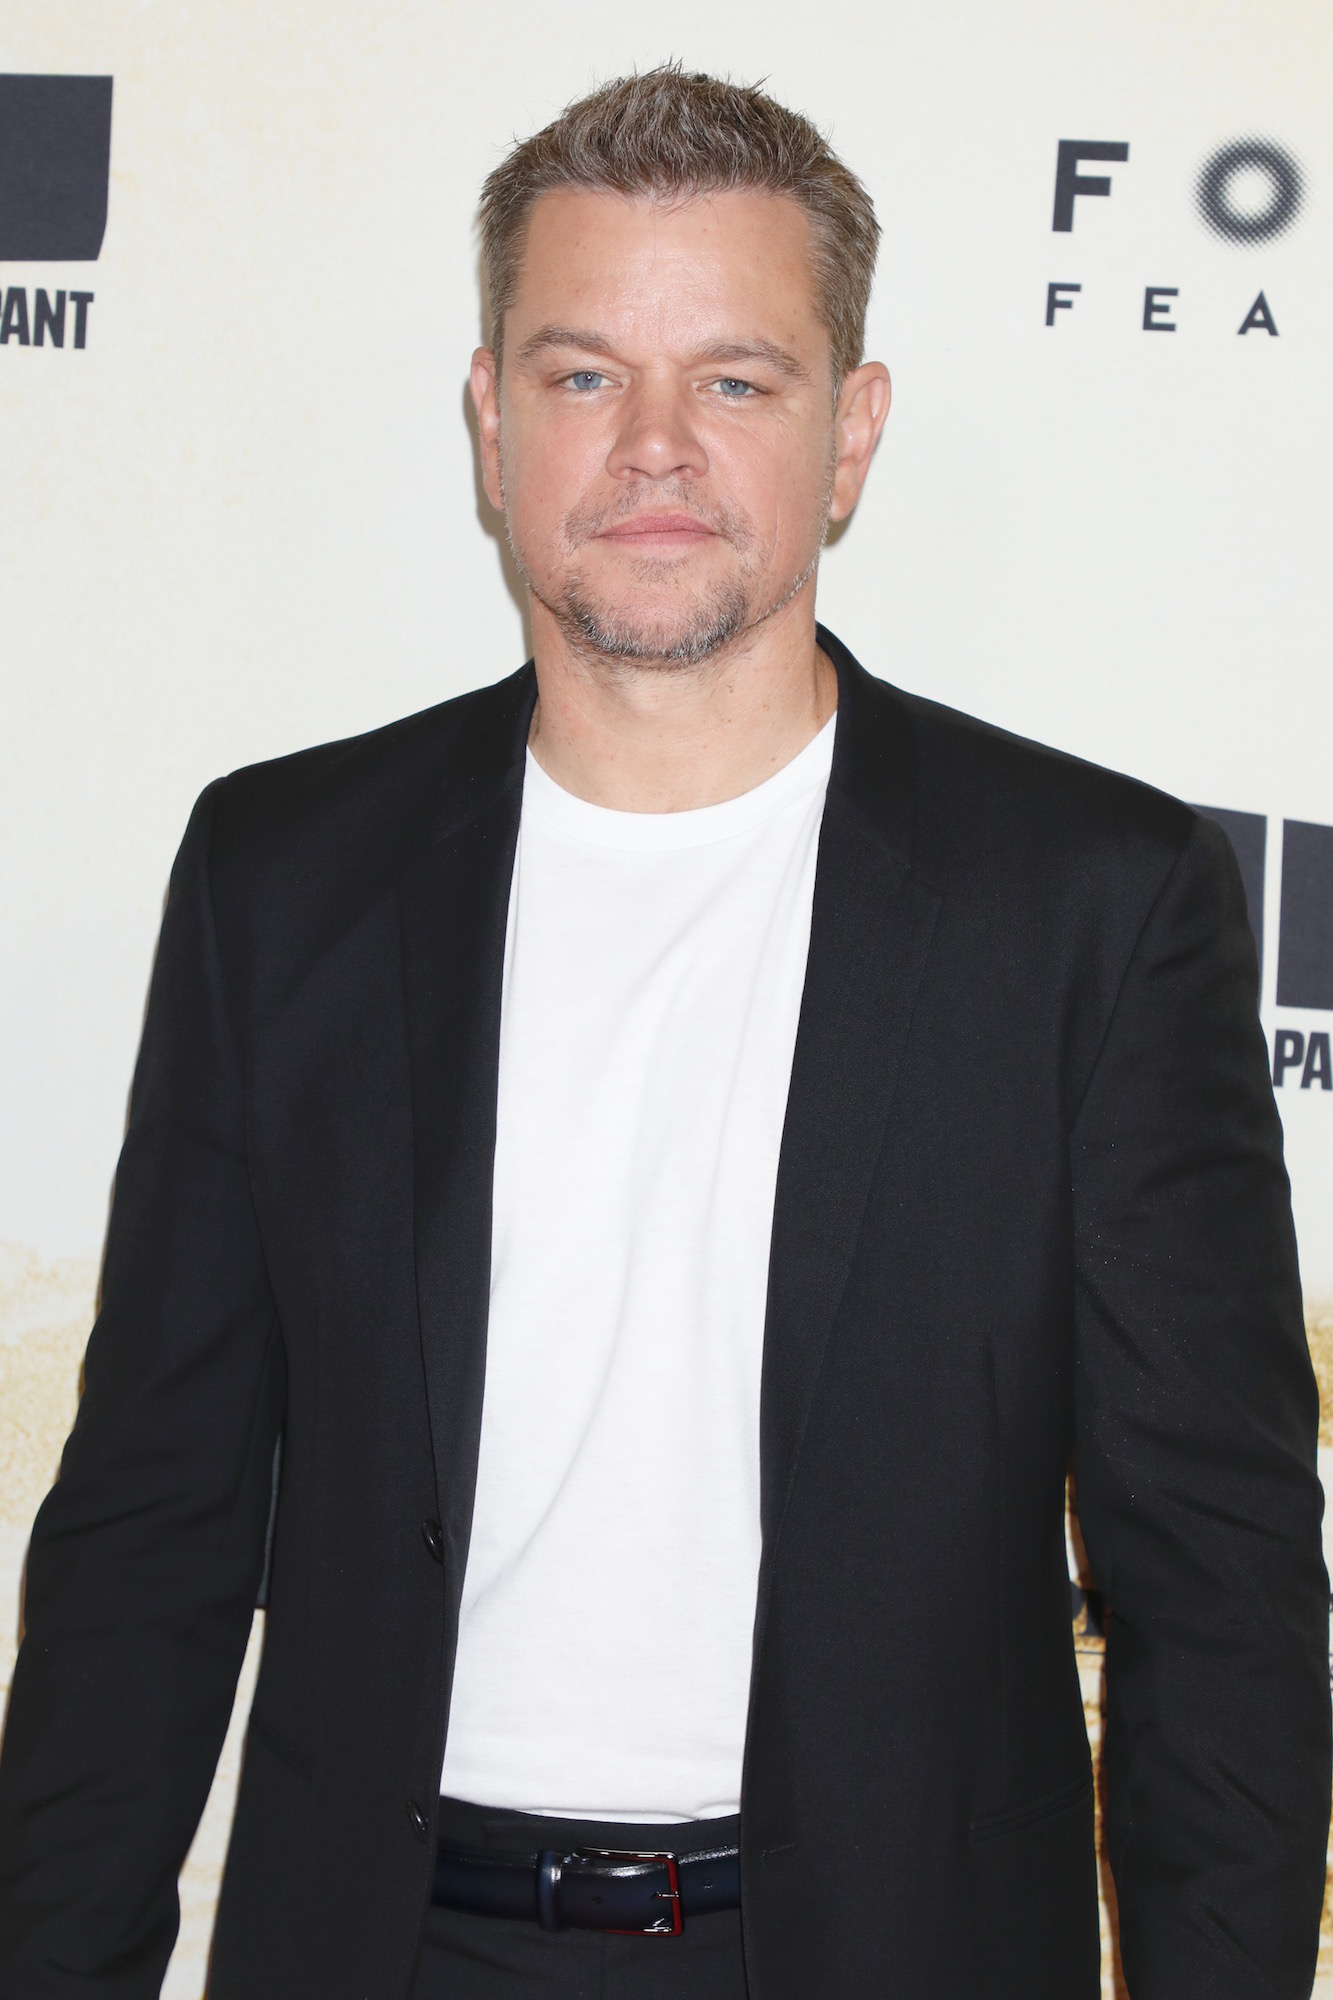 Matt Damon and More Celebrities Whose Kids Tested Positive for COVID-19